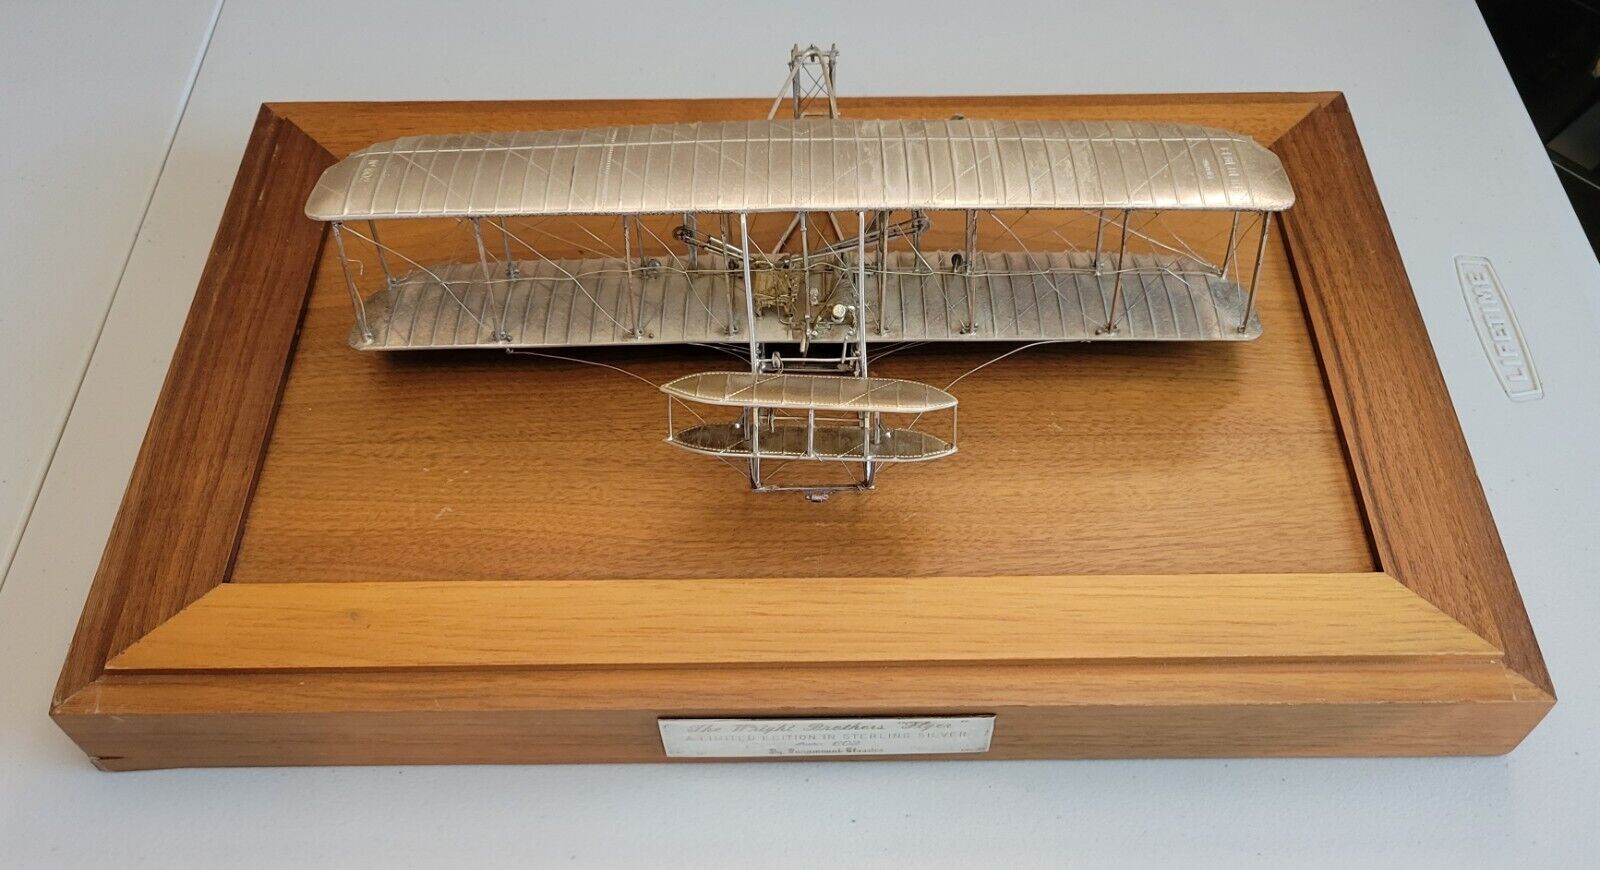 The Wright Brothers Flyer 12